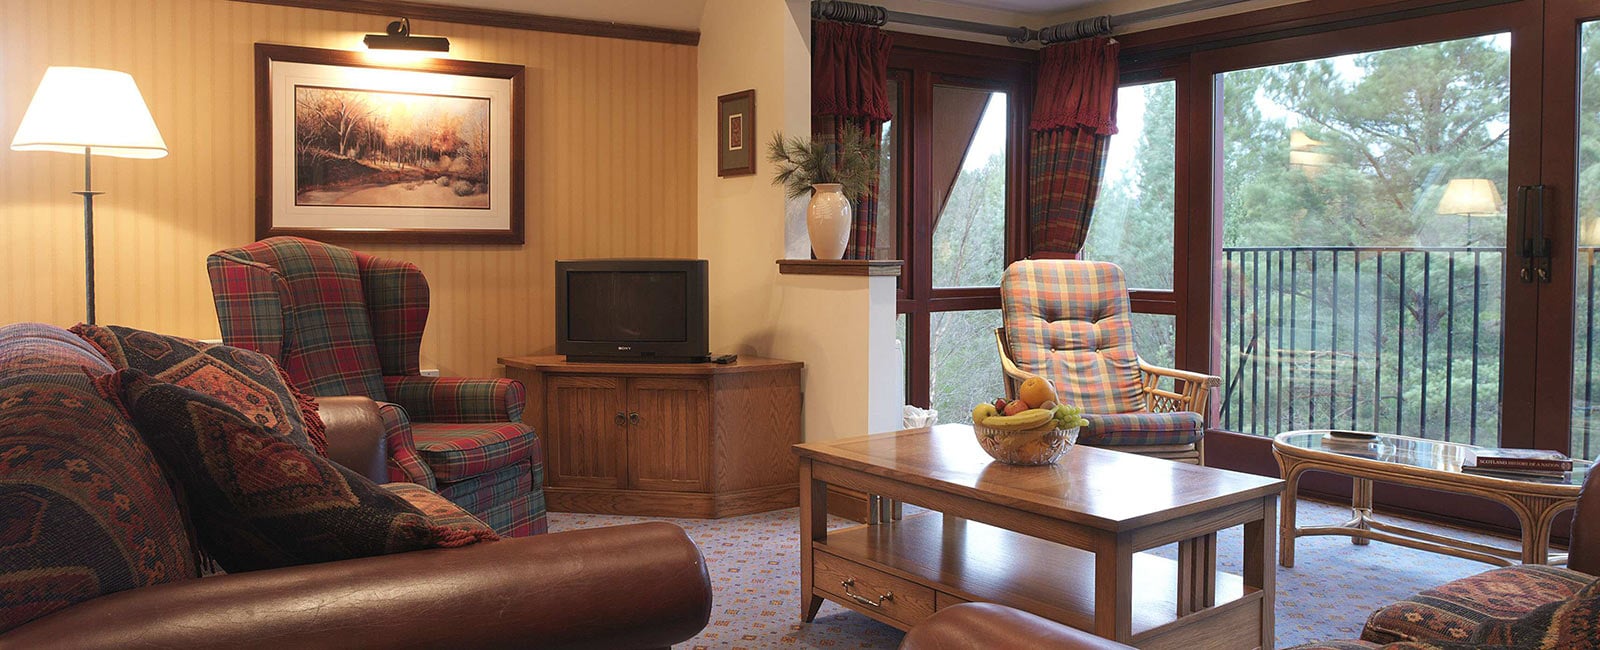 Living Area at Hilton Grand Vacations Club at Coylumbridge in Inverness-shire, Scotland